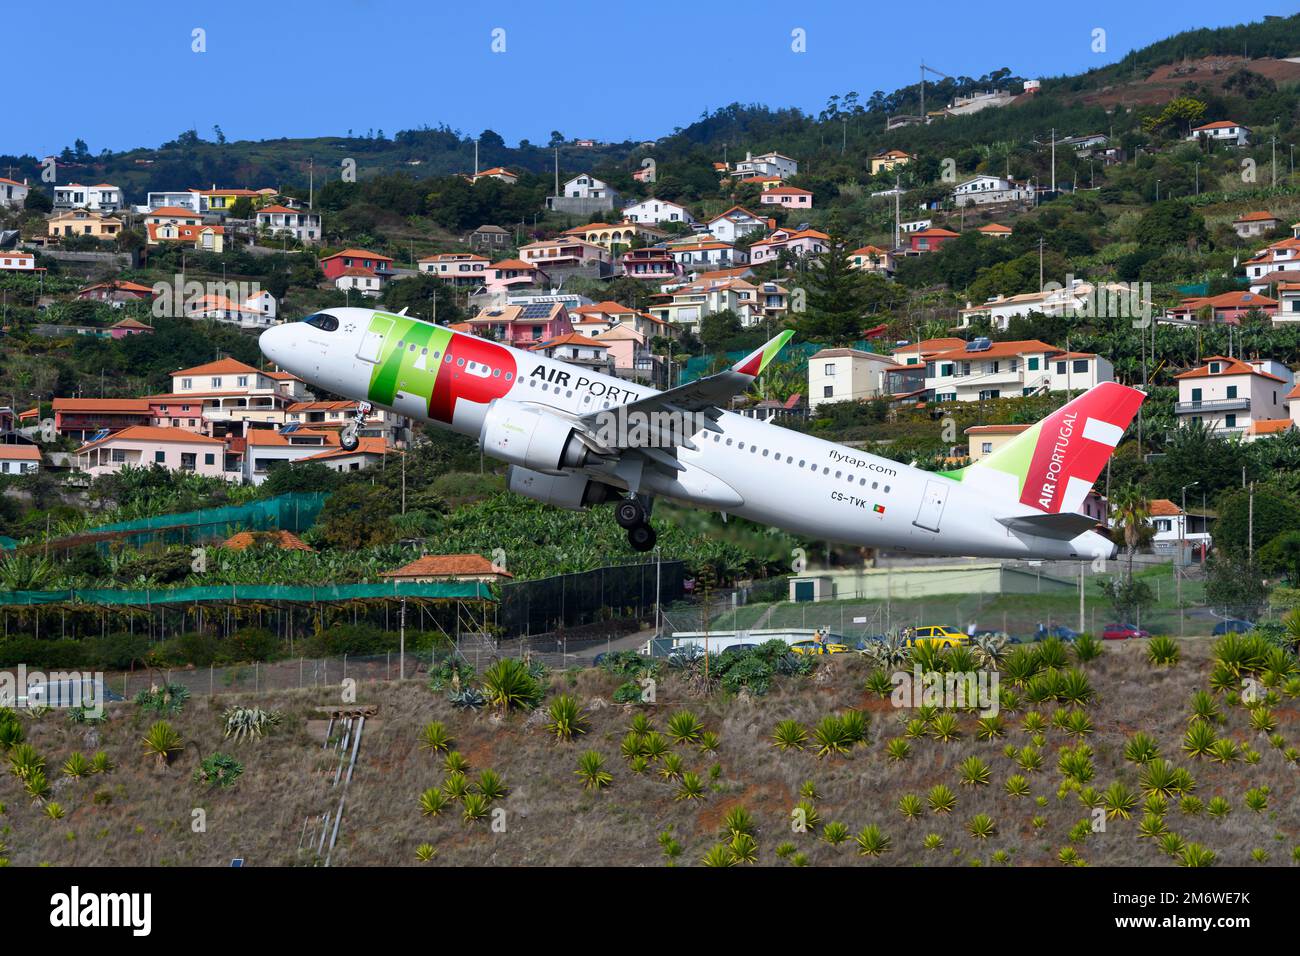 TAP Air Portugal Airbus A320 aircraft taking off from Madeira Airport in Funchal Island.. Airplane A320 of airline TAP Portugal departing. Stock Photo